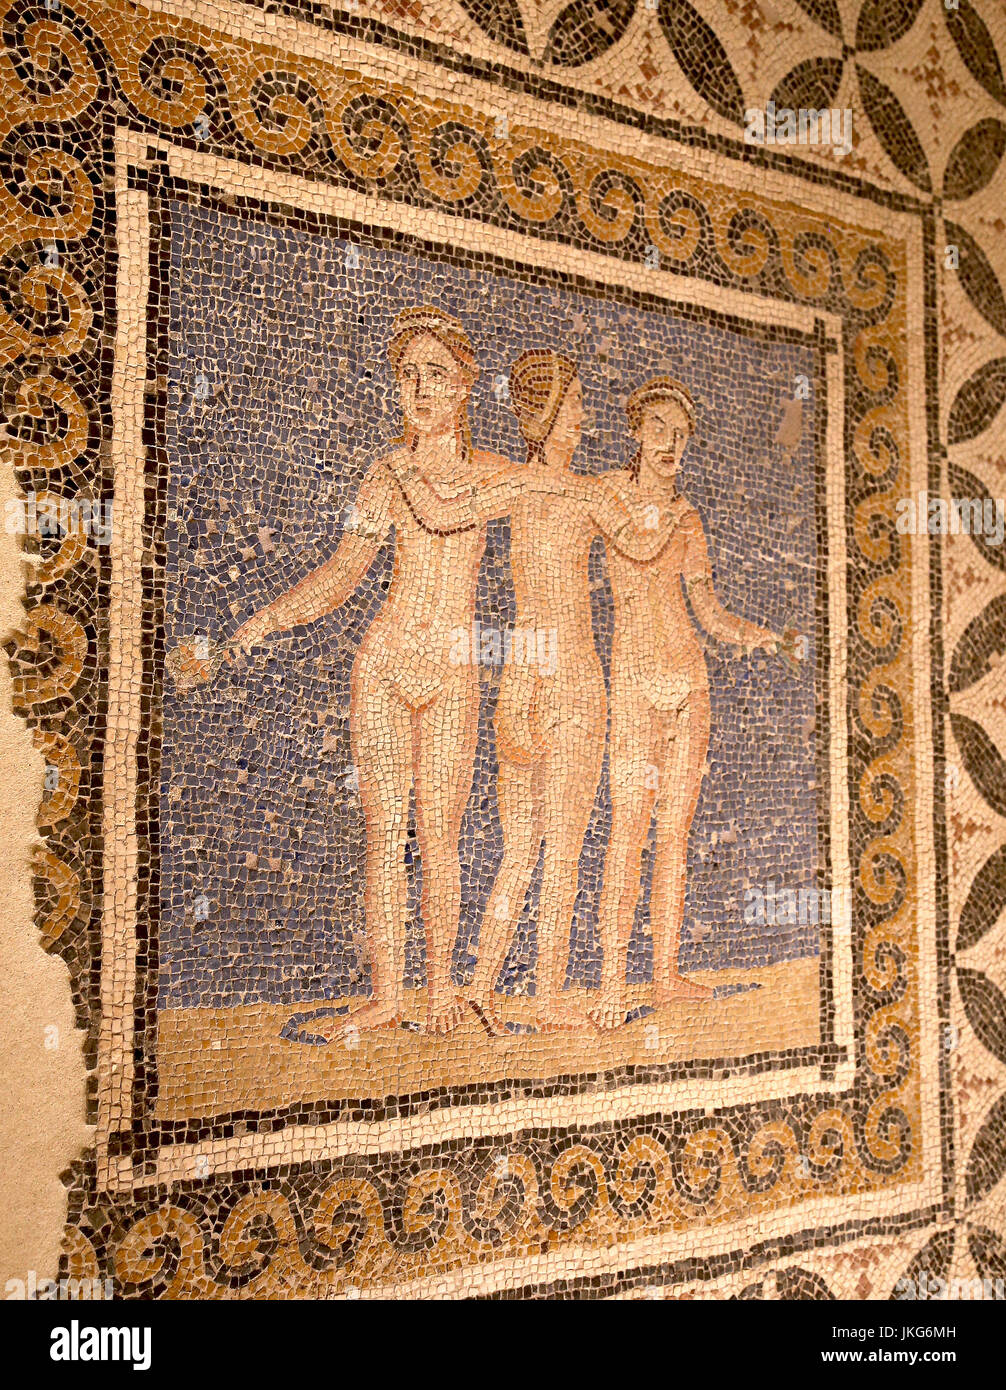 Mosaic of Three Graces. Roman culture, Opus Tessellatum, marble of different colors and glass paste. 3rd Century AD. Teaching Convent, Barcelona. Stock Photo